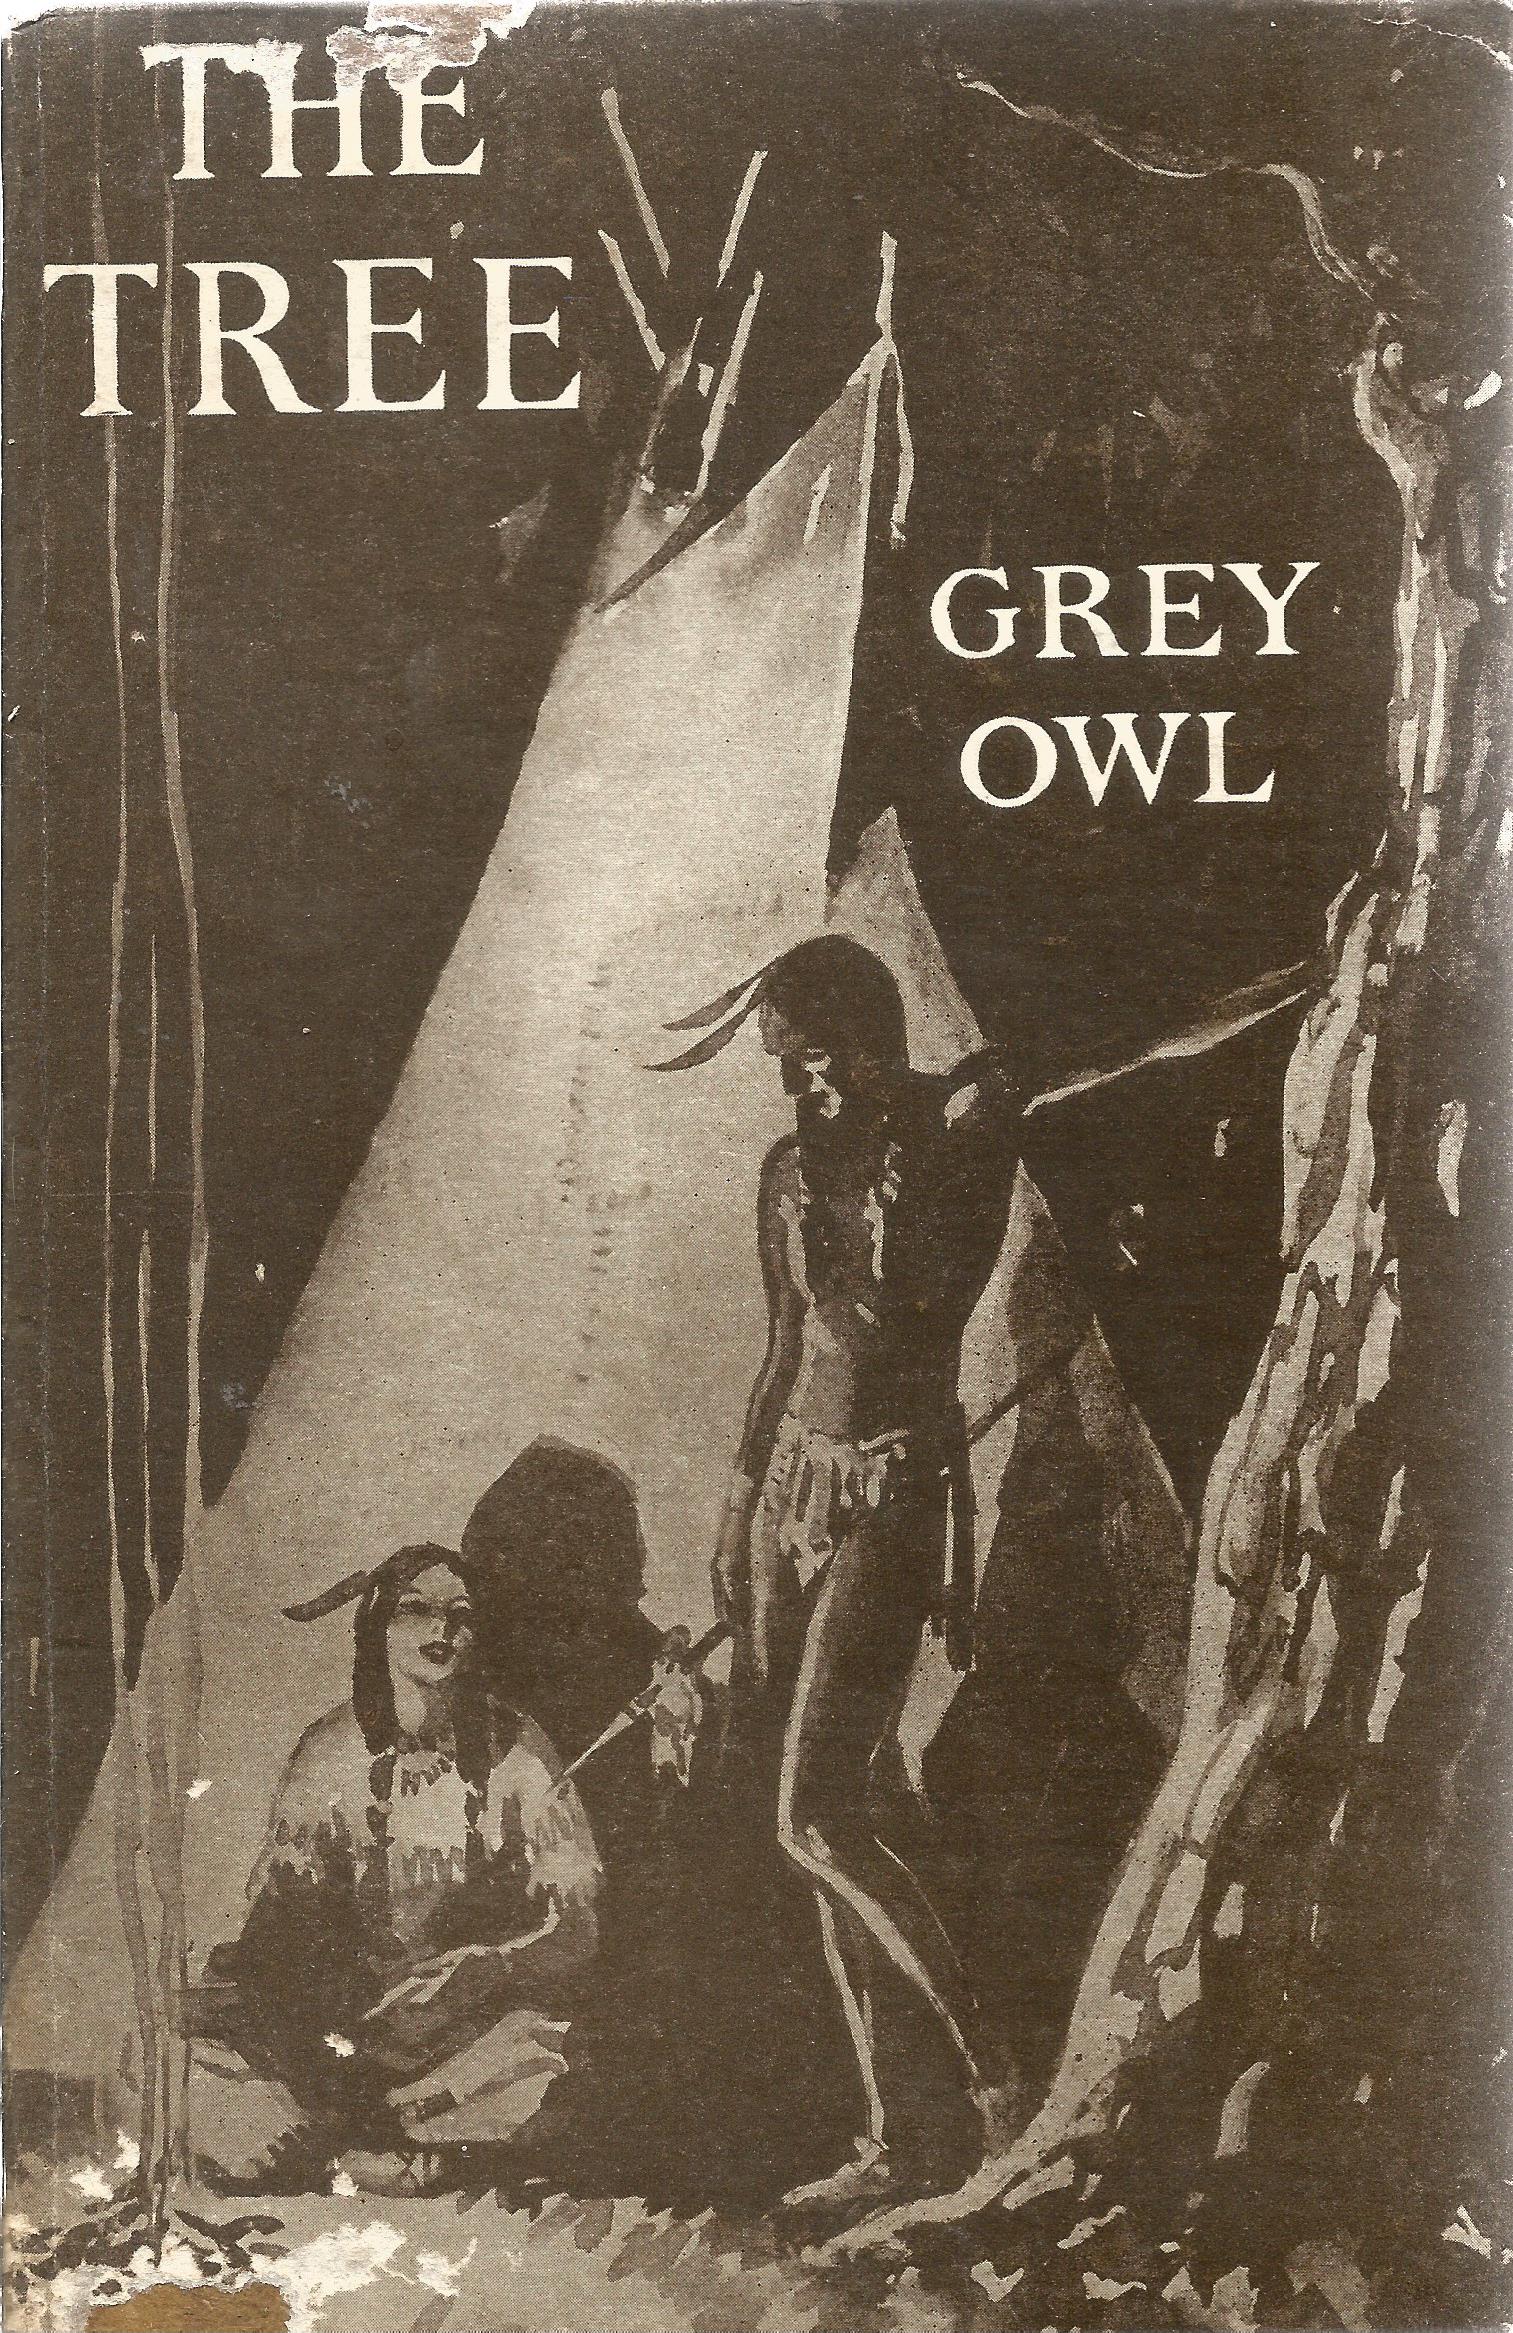 Hardback Book The Tree by Grey Owl (Wa Sha Quon Asin) 1937 First Edition published by Lovat